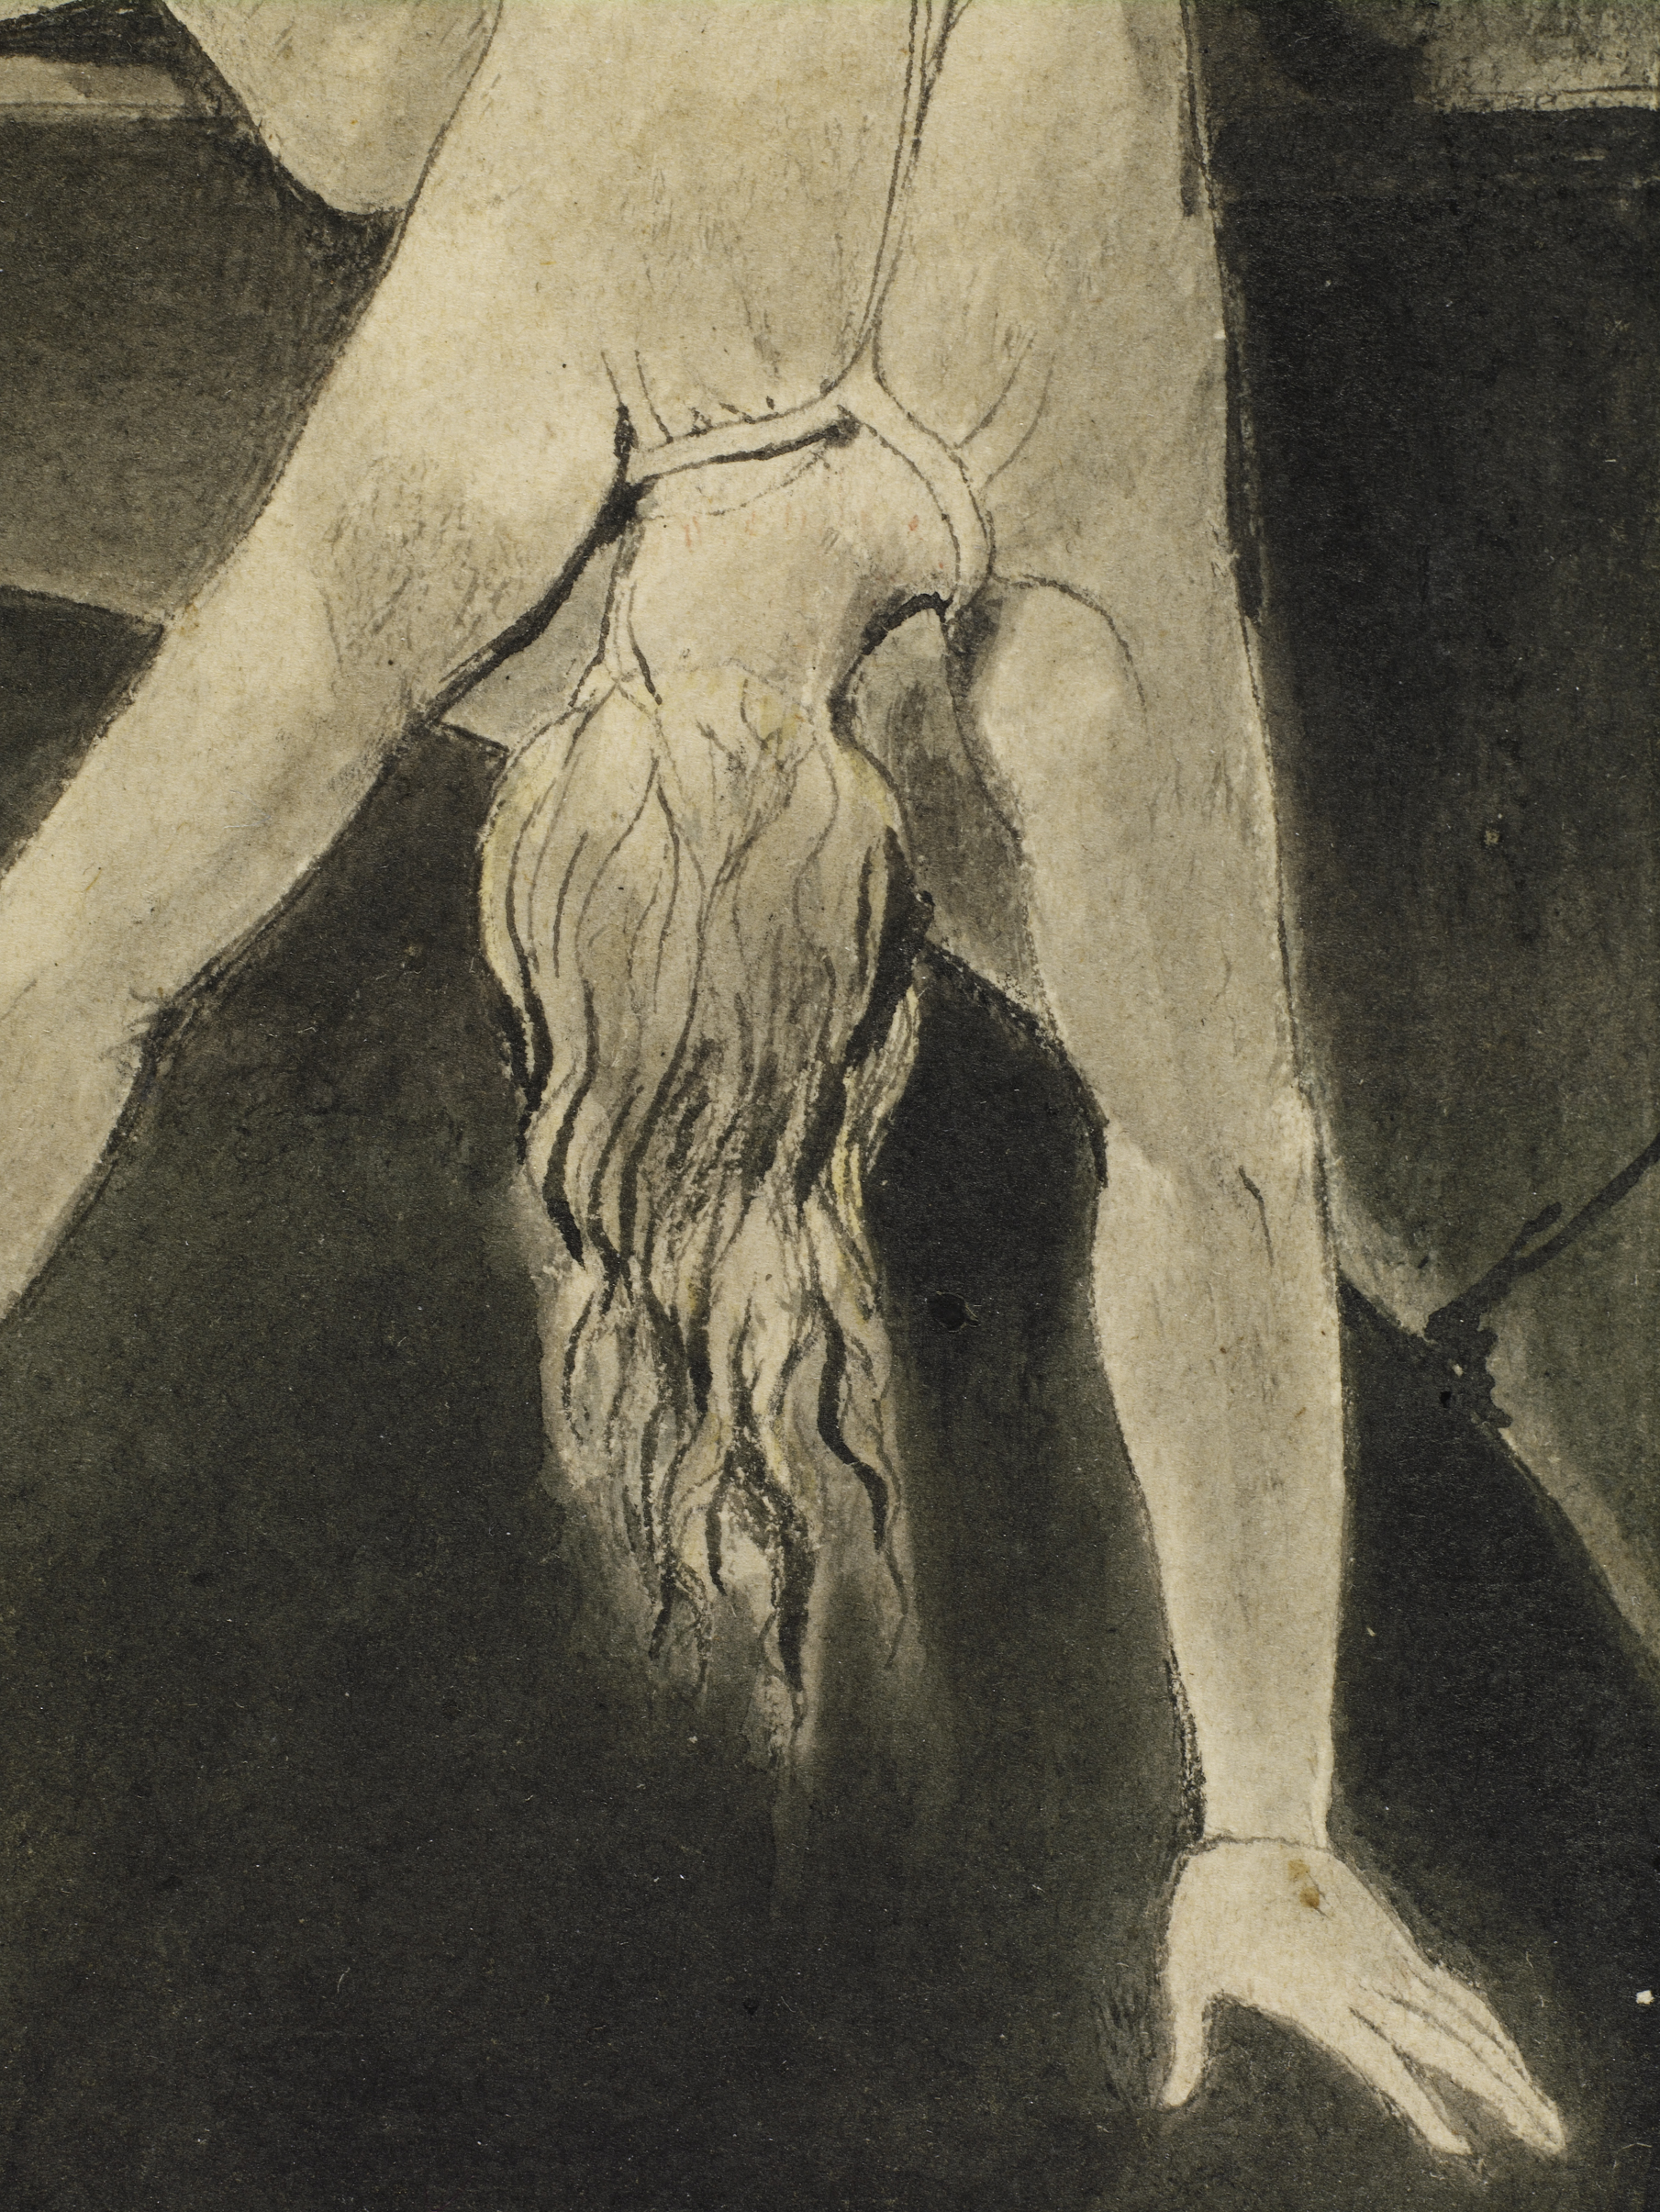 Death Pursuing, detail of the head, neck, and left arm of the Soul